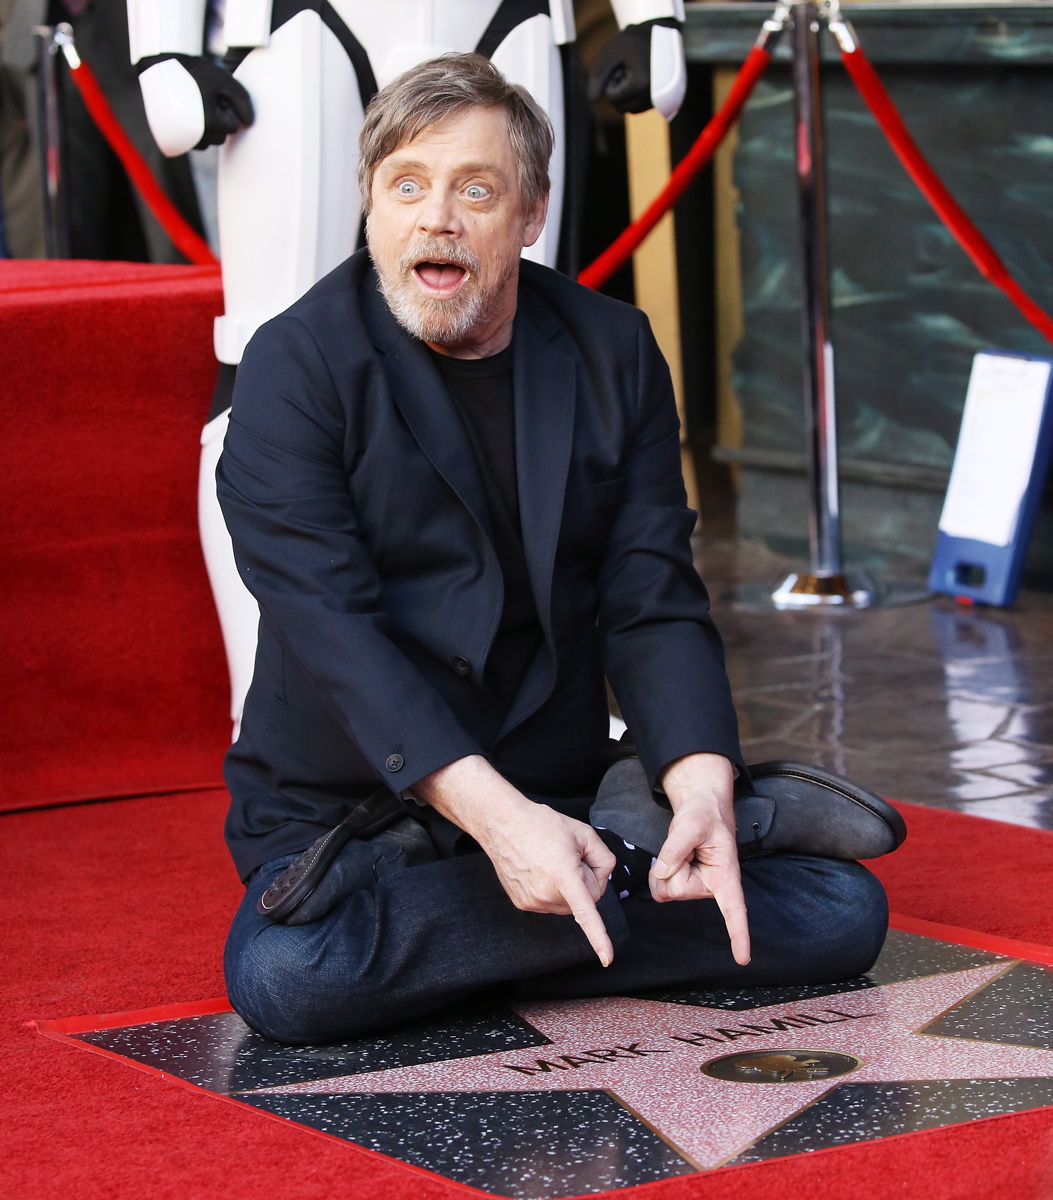 Hamill, who played Luke Skywalker, happily posed with his star in front of El Capitan Theatre on March 8, 2018 in Hollywood, California.